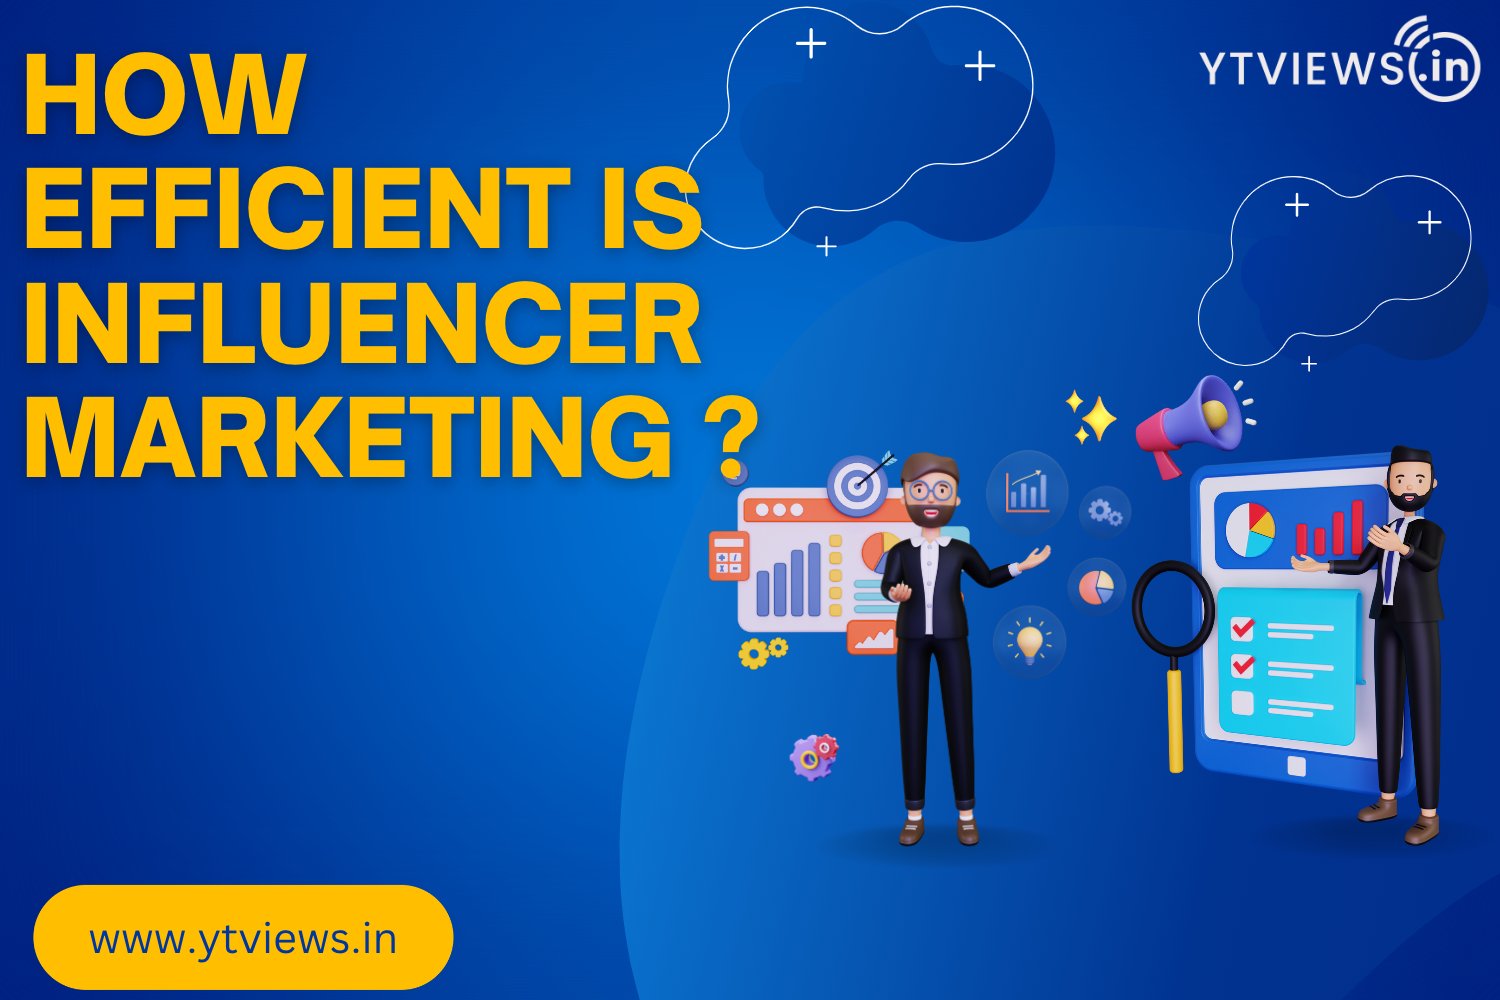 How Efficient is Influencer Marketing?